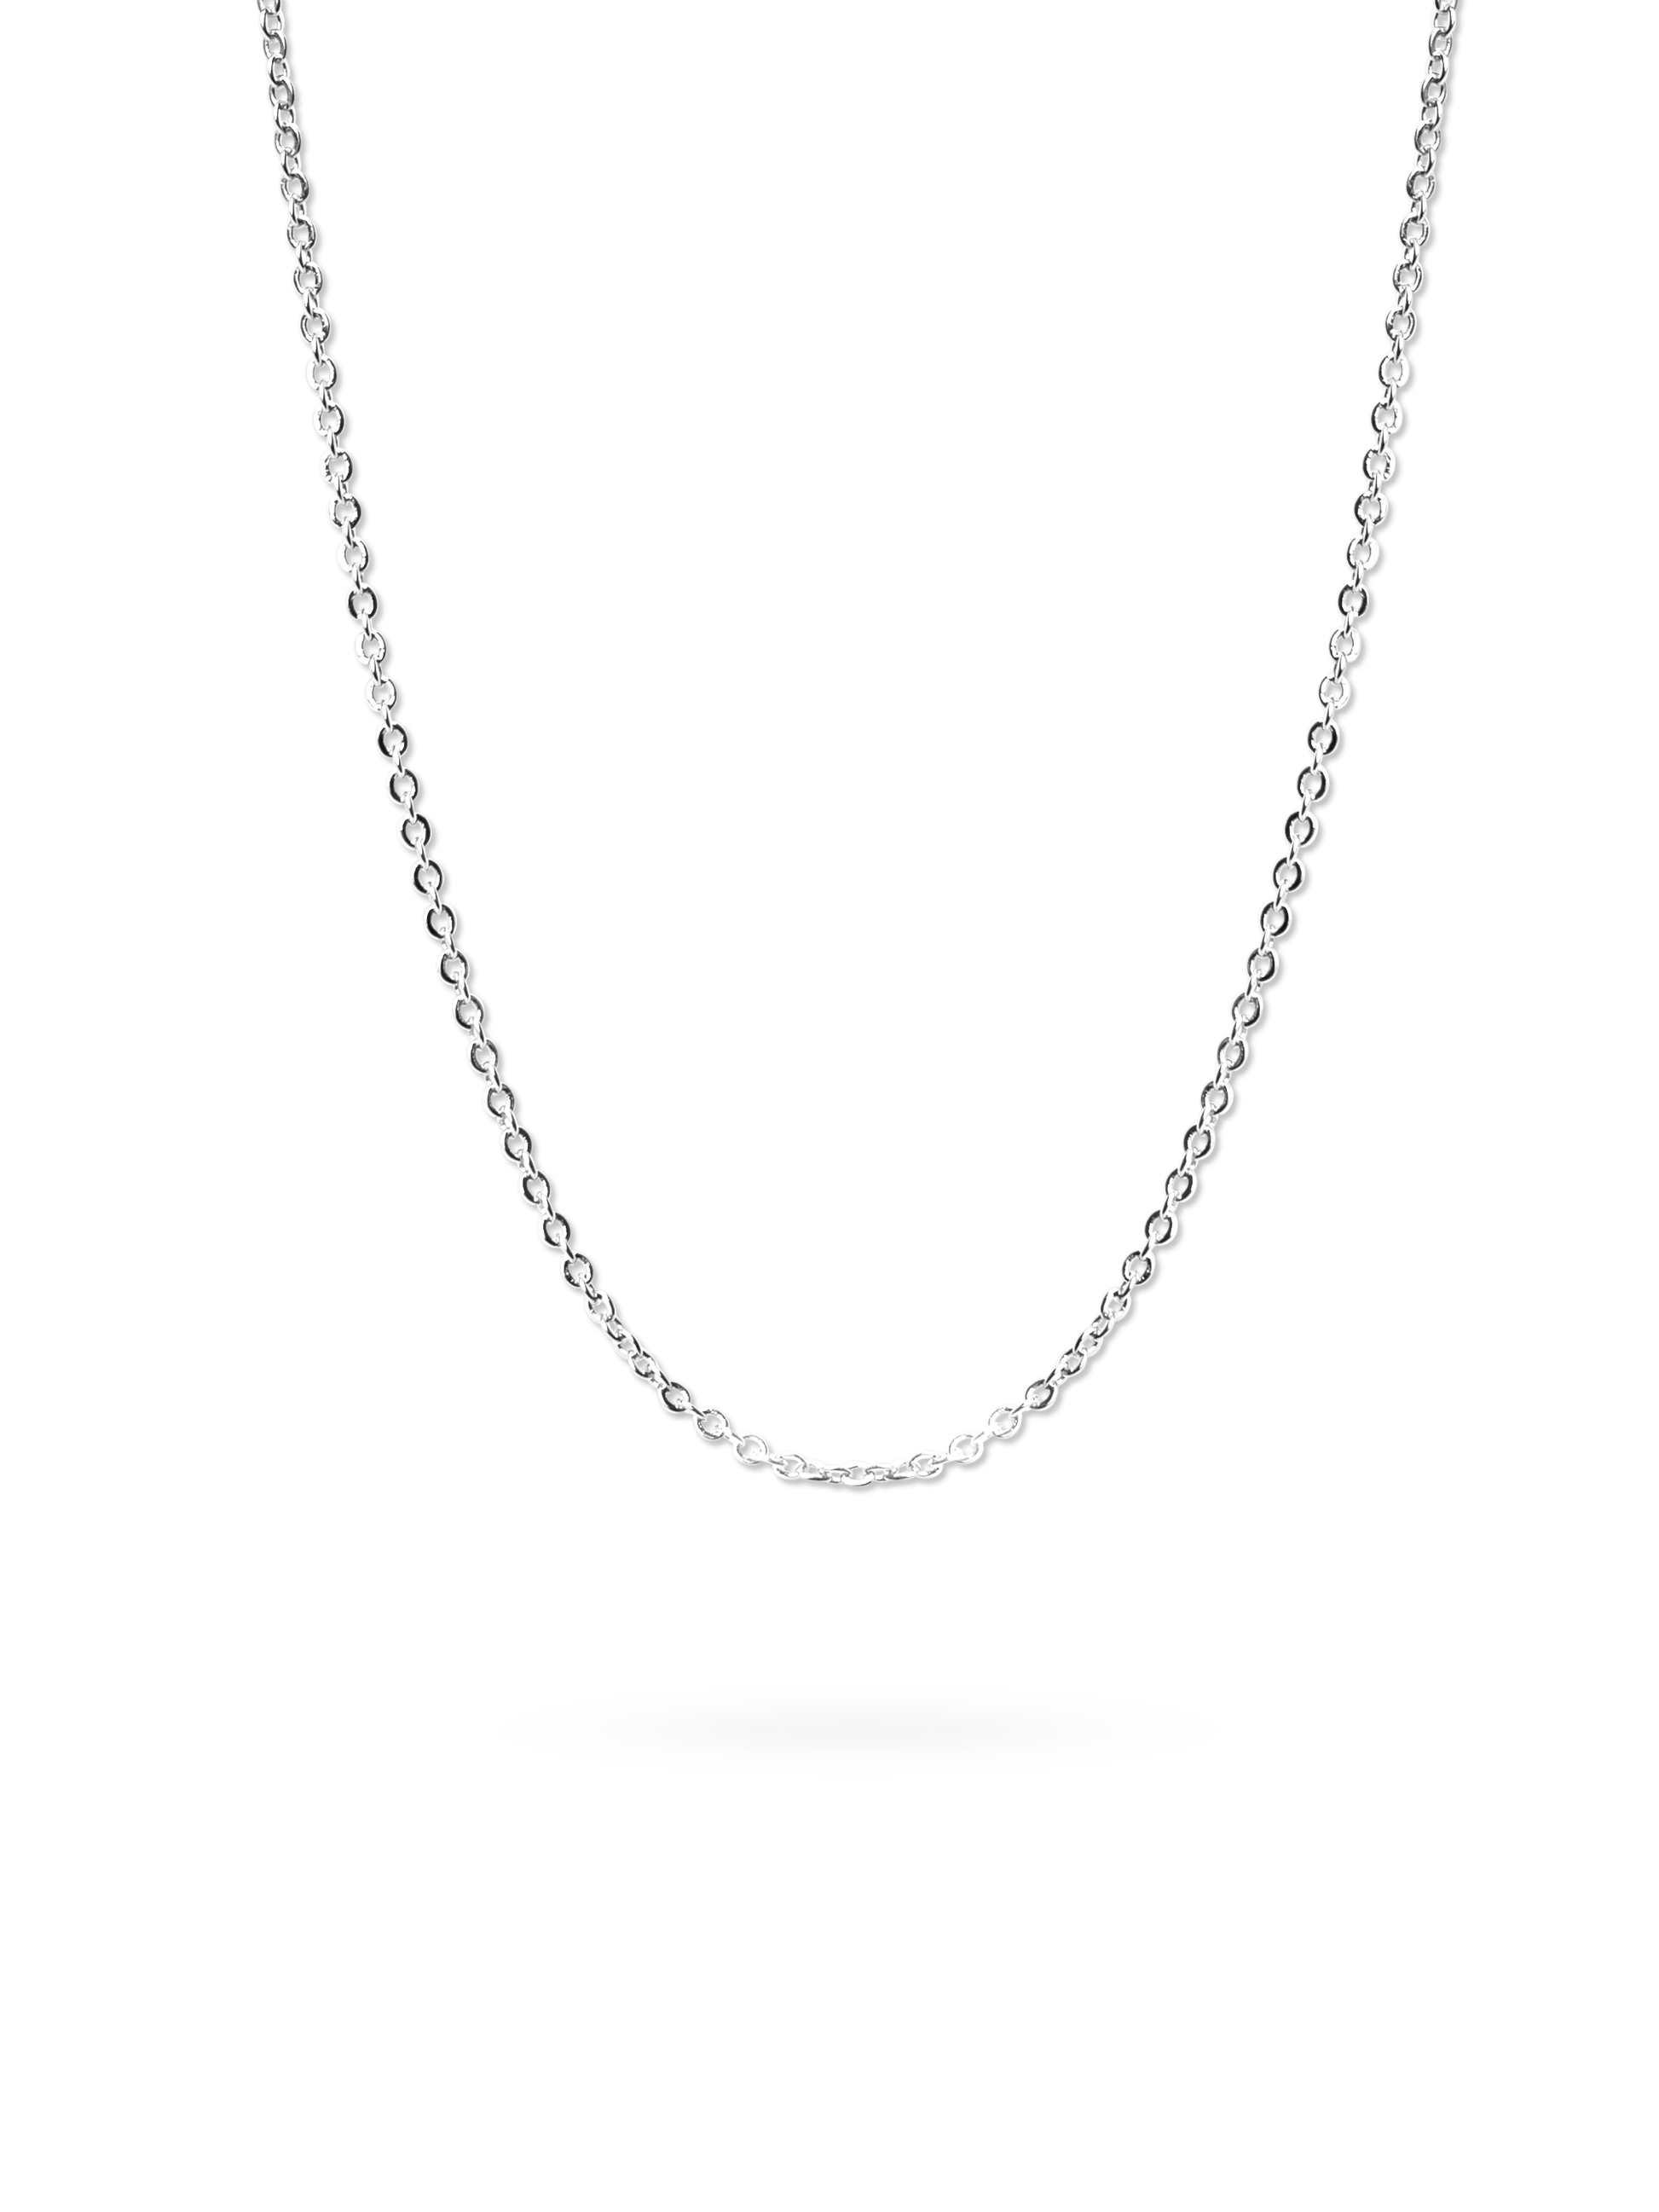 Belcher necklace made of 925 sterling silver plated brass